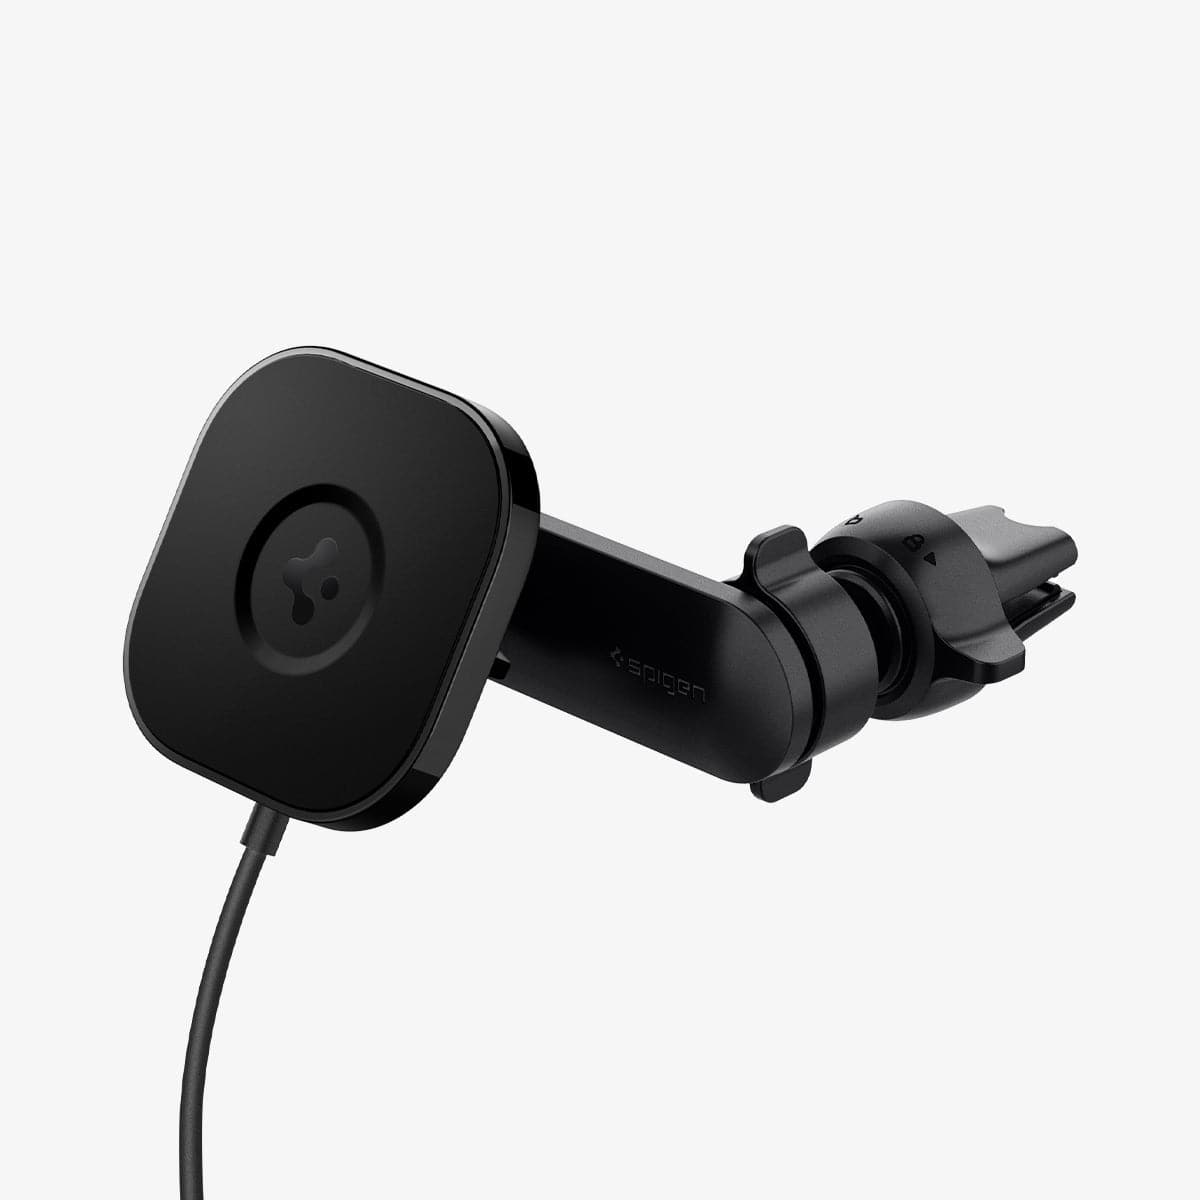 ACP02615 - OneTap Pro Wireless Magnetic Car Charger Air Vent (MagFit) in black showing the front and side